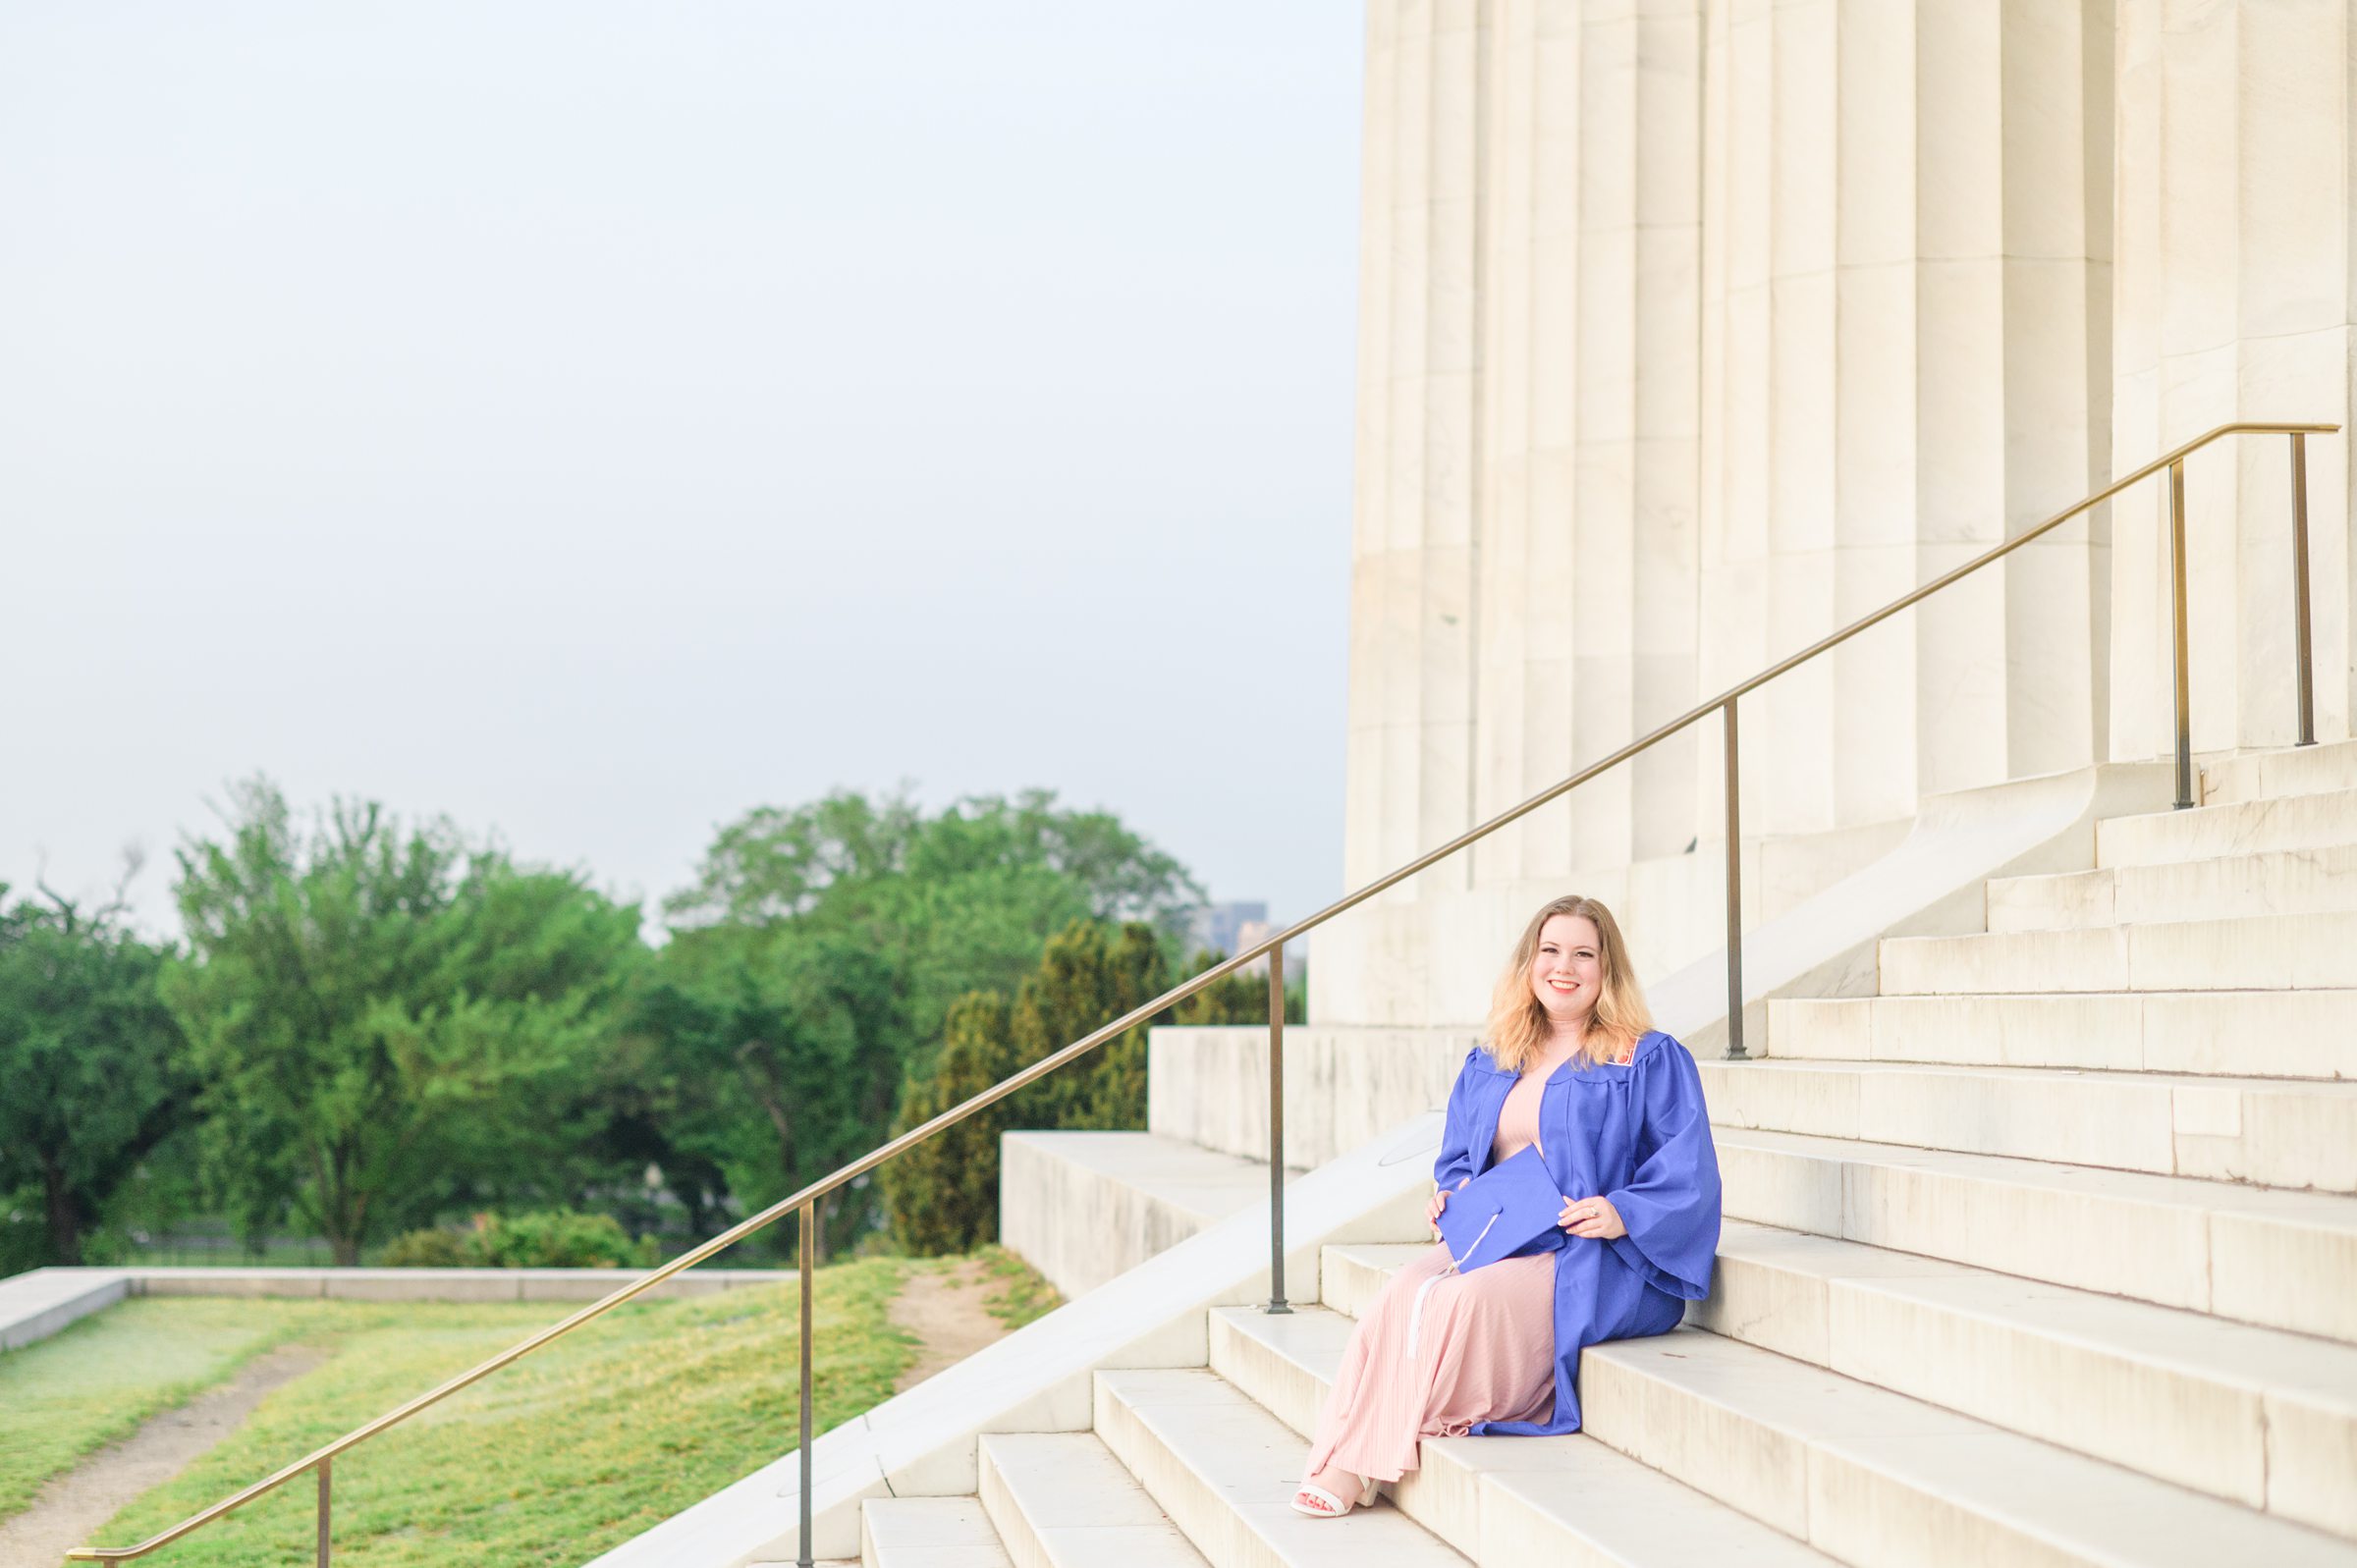 American University Grad Photos on the National Mall photographed by Baltimore Photographer Cait Kramer